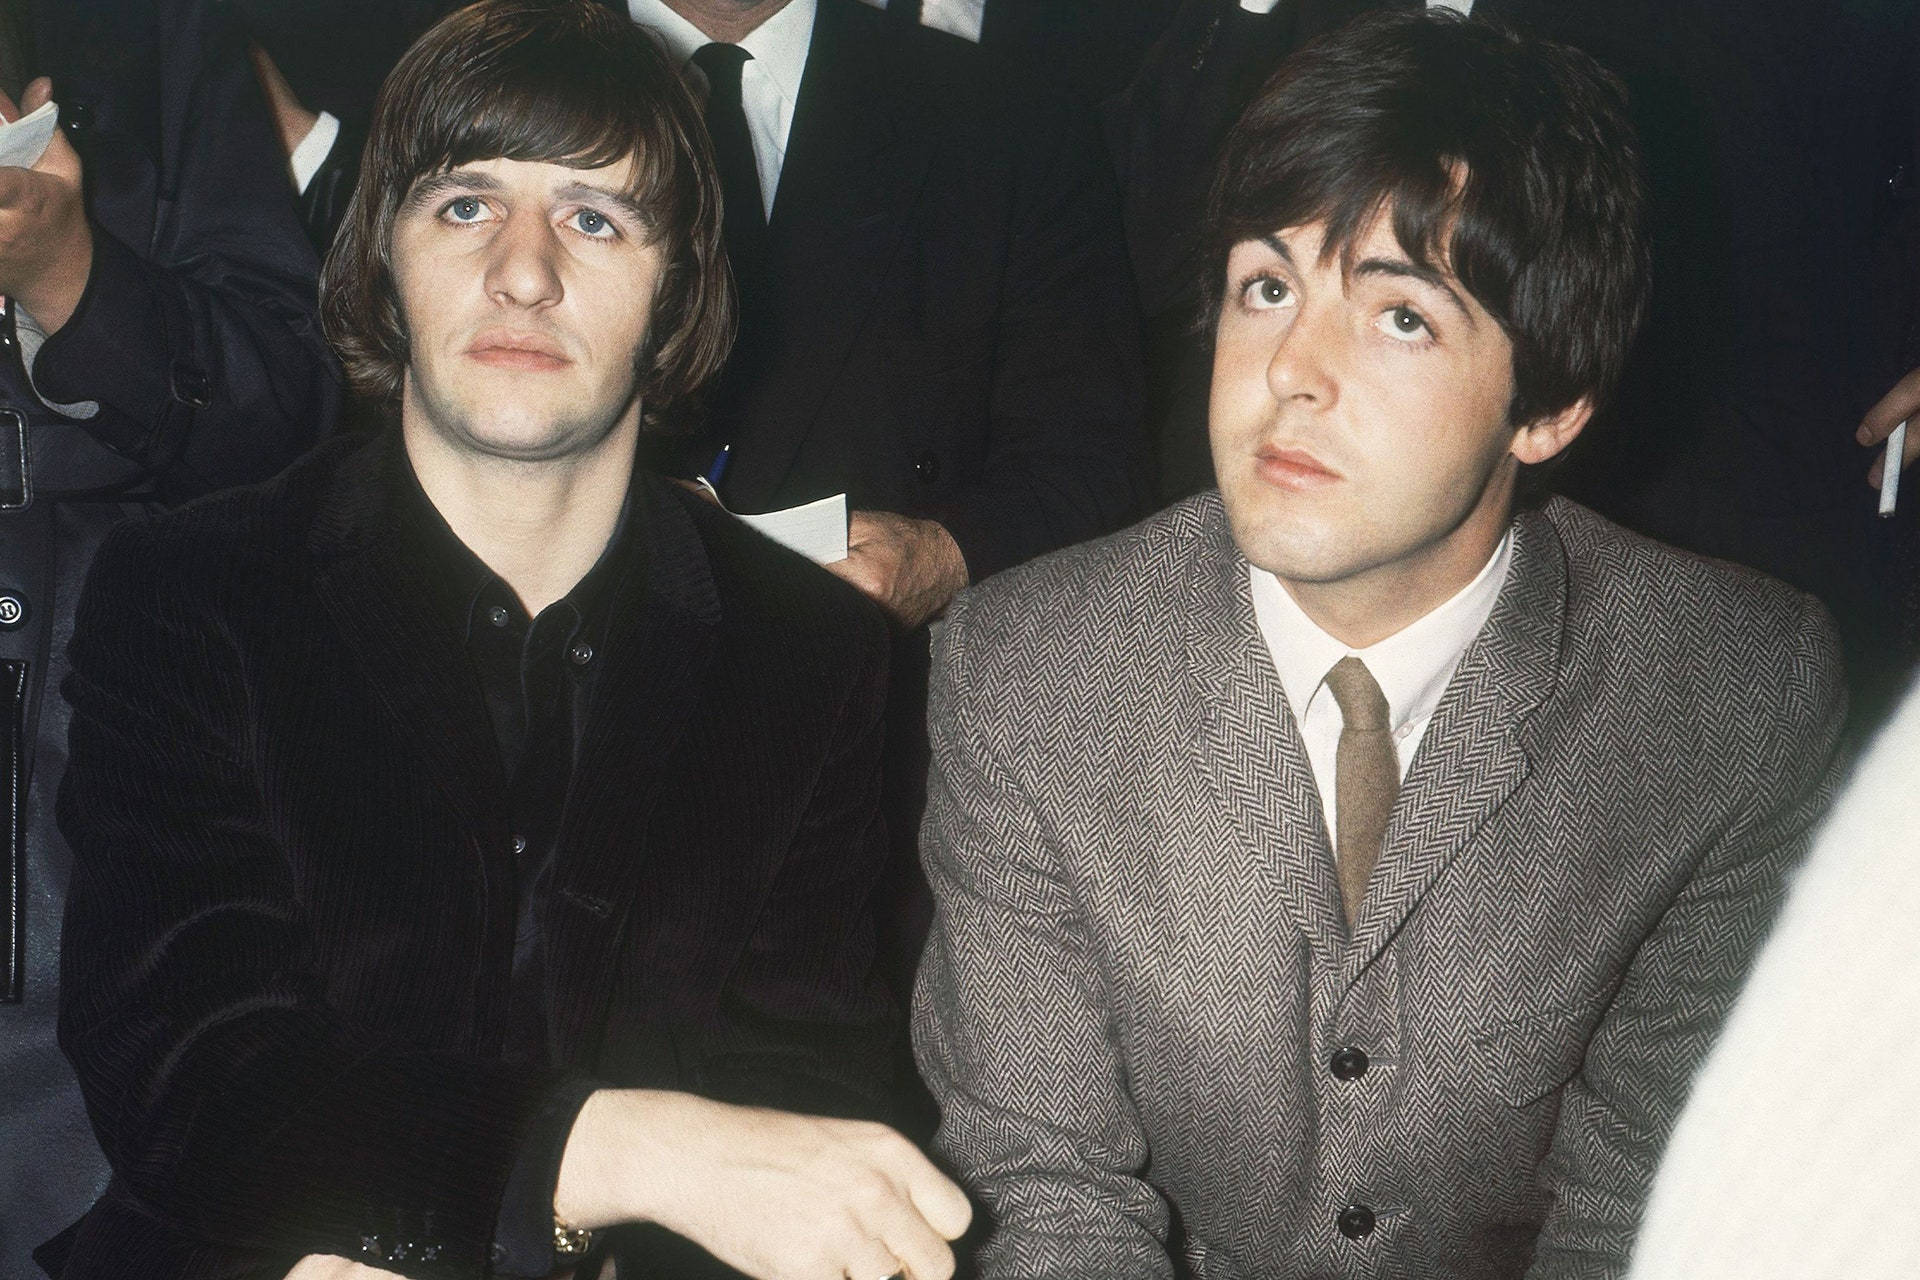 Iconic Beatles' Members Paul Mccartney And Ringo Starr In Classic Suits